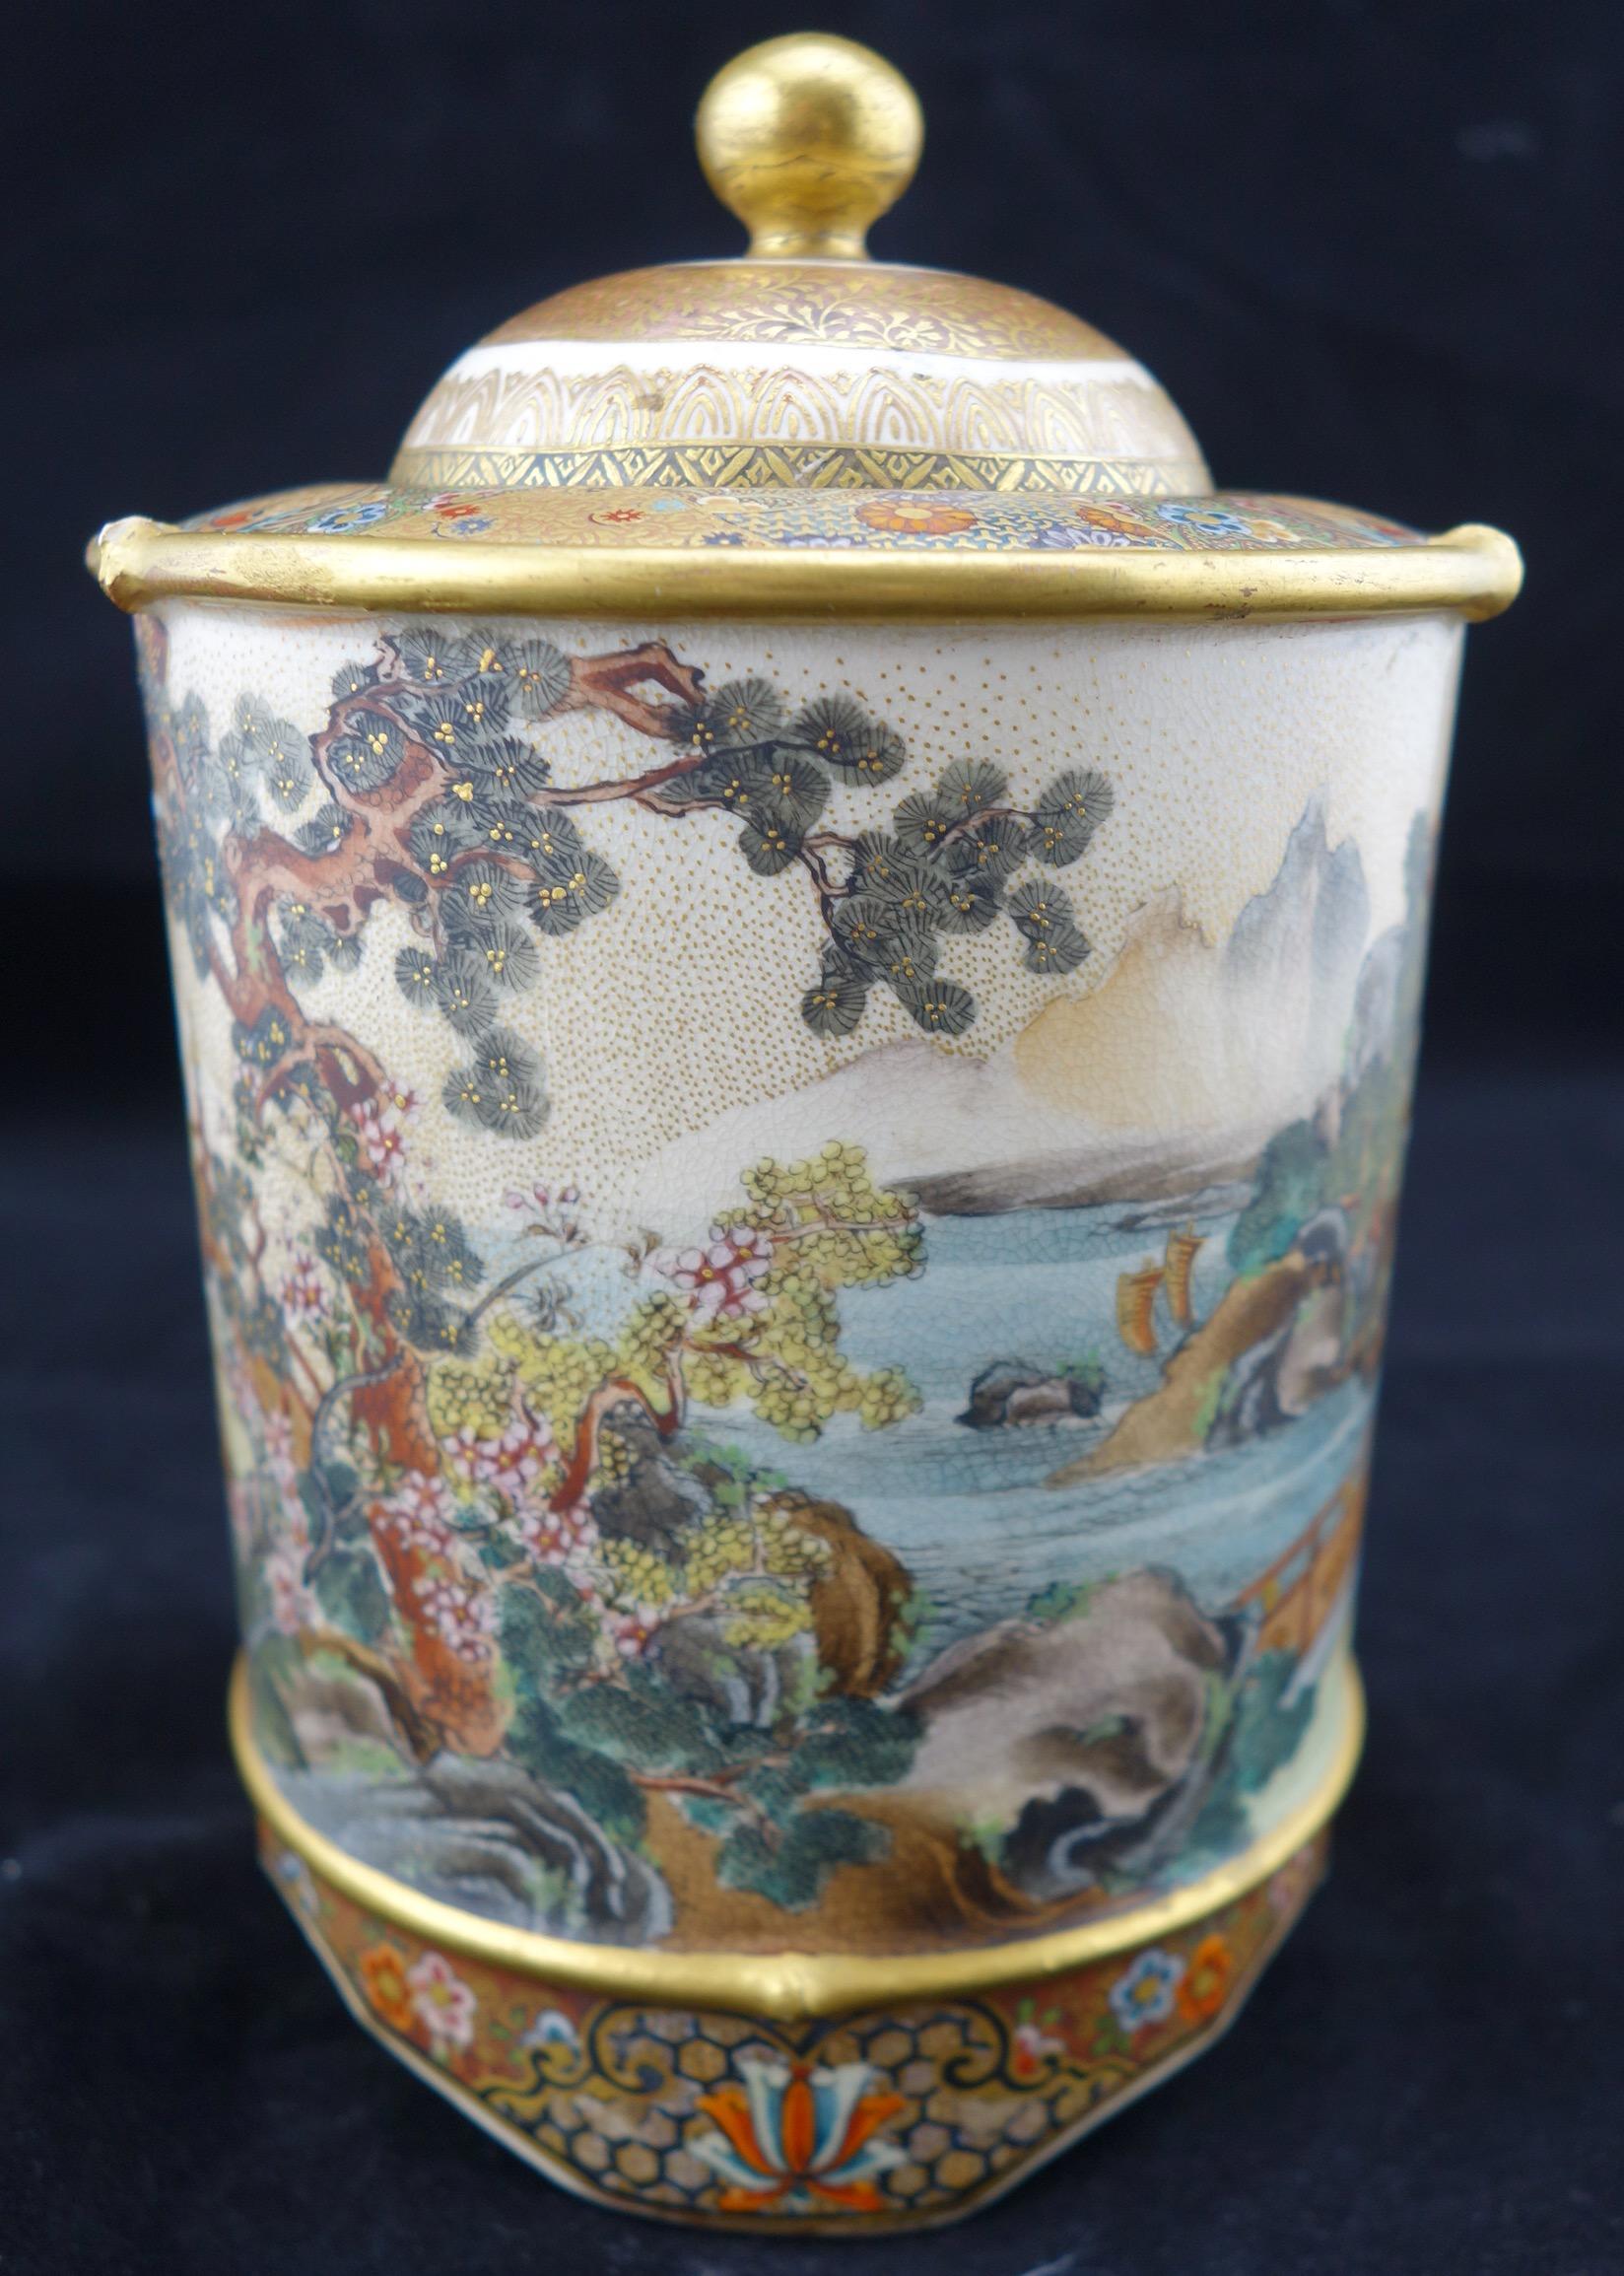 Japanese Meiji satsuma covered scenic jar. Very detailed hand gilding and hand decoration. Maker's mark present on the bottom .